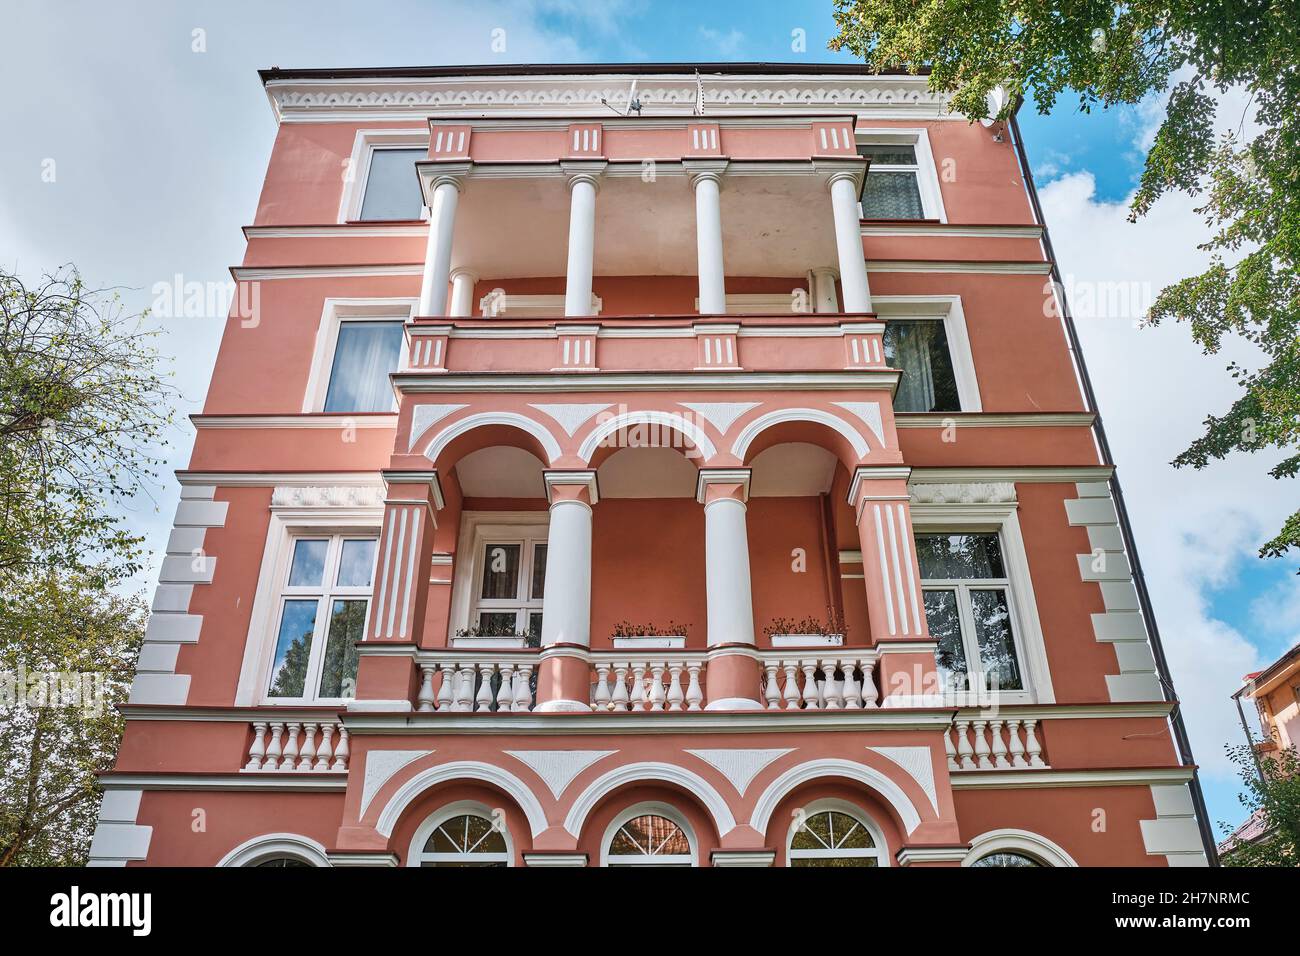 Villa built of endly 19th century in style of Art Nouveau of red clinker brick. Kaliningrad, Russia Stock Photo